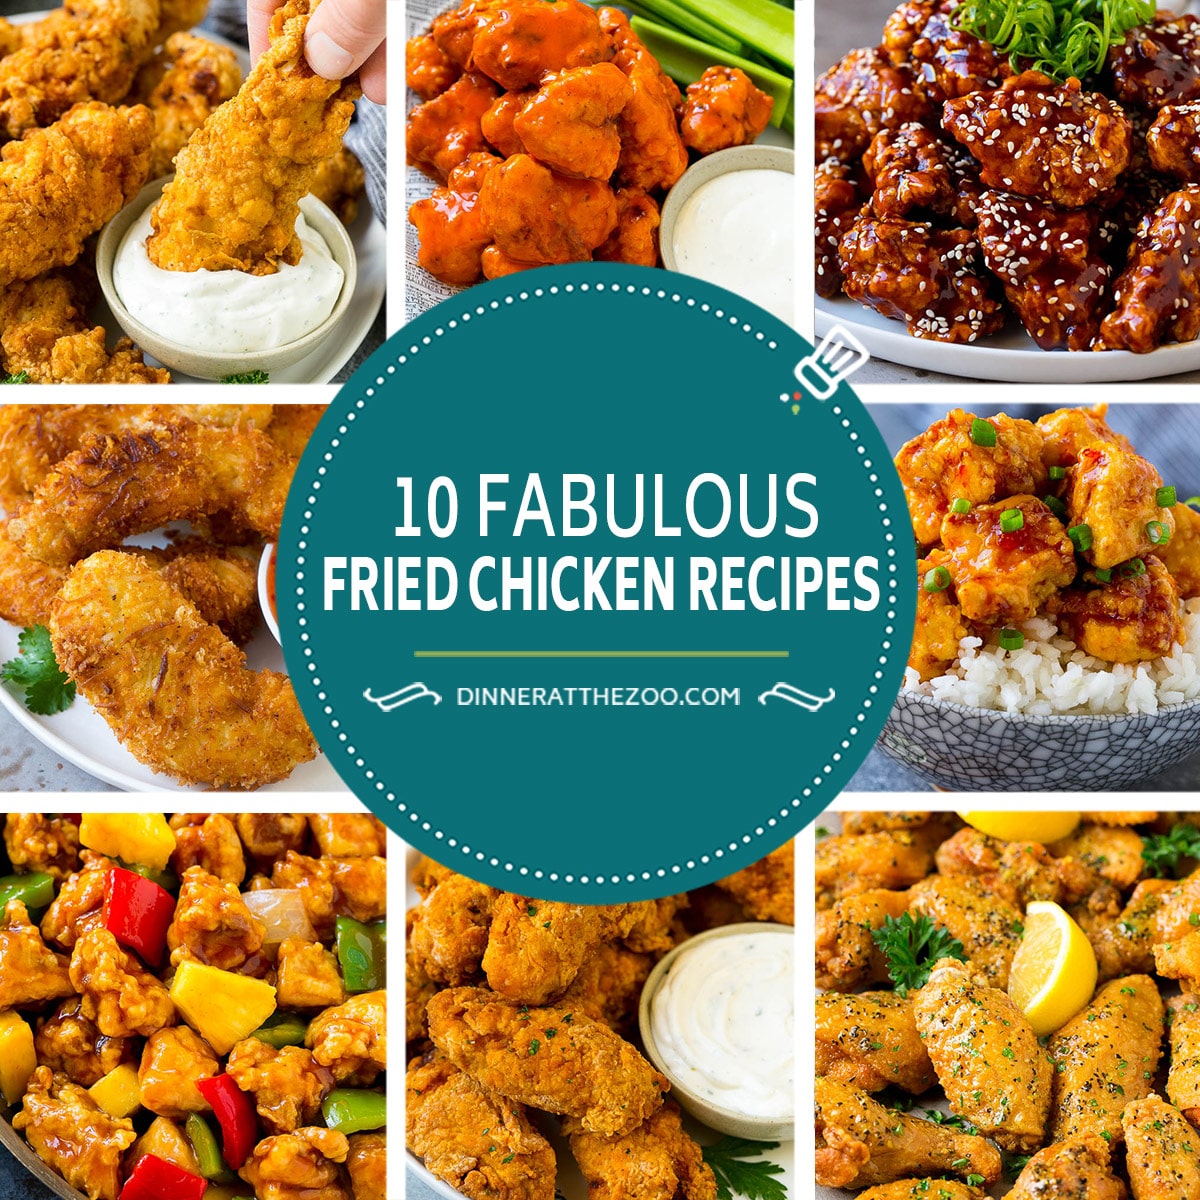 A collection of fabulous fried chicken recipes including buffalo chicken nuggets, fried chicken wings and sweet and sour chicken.